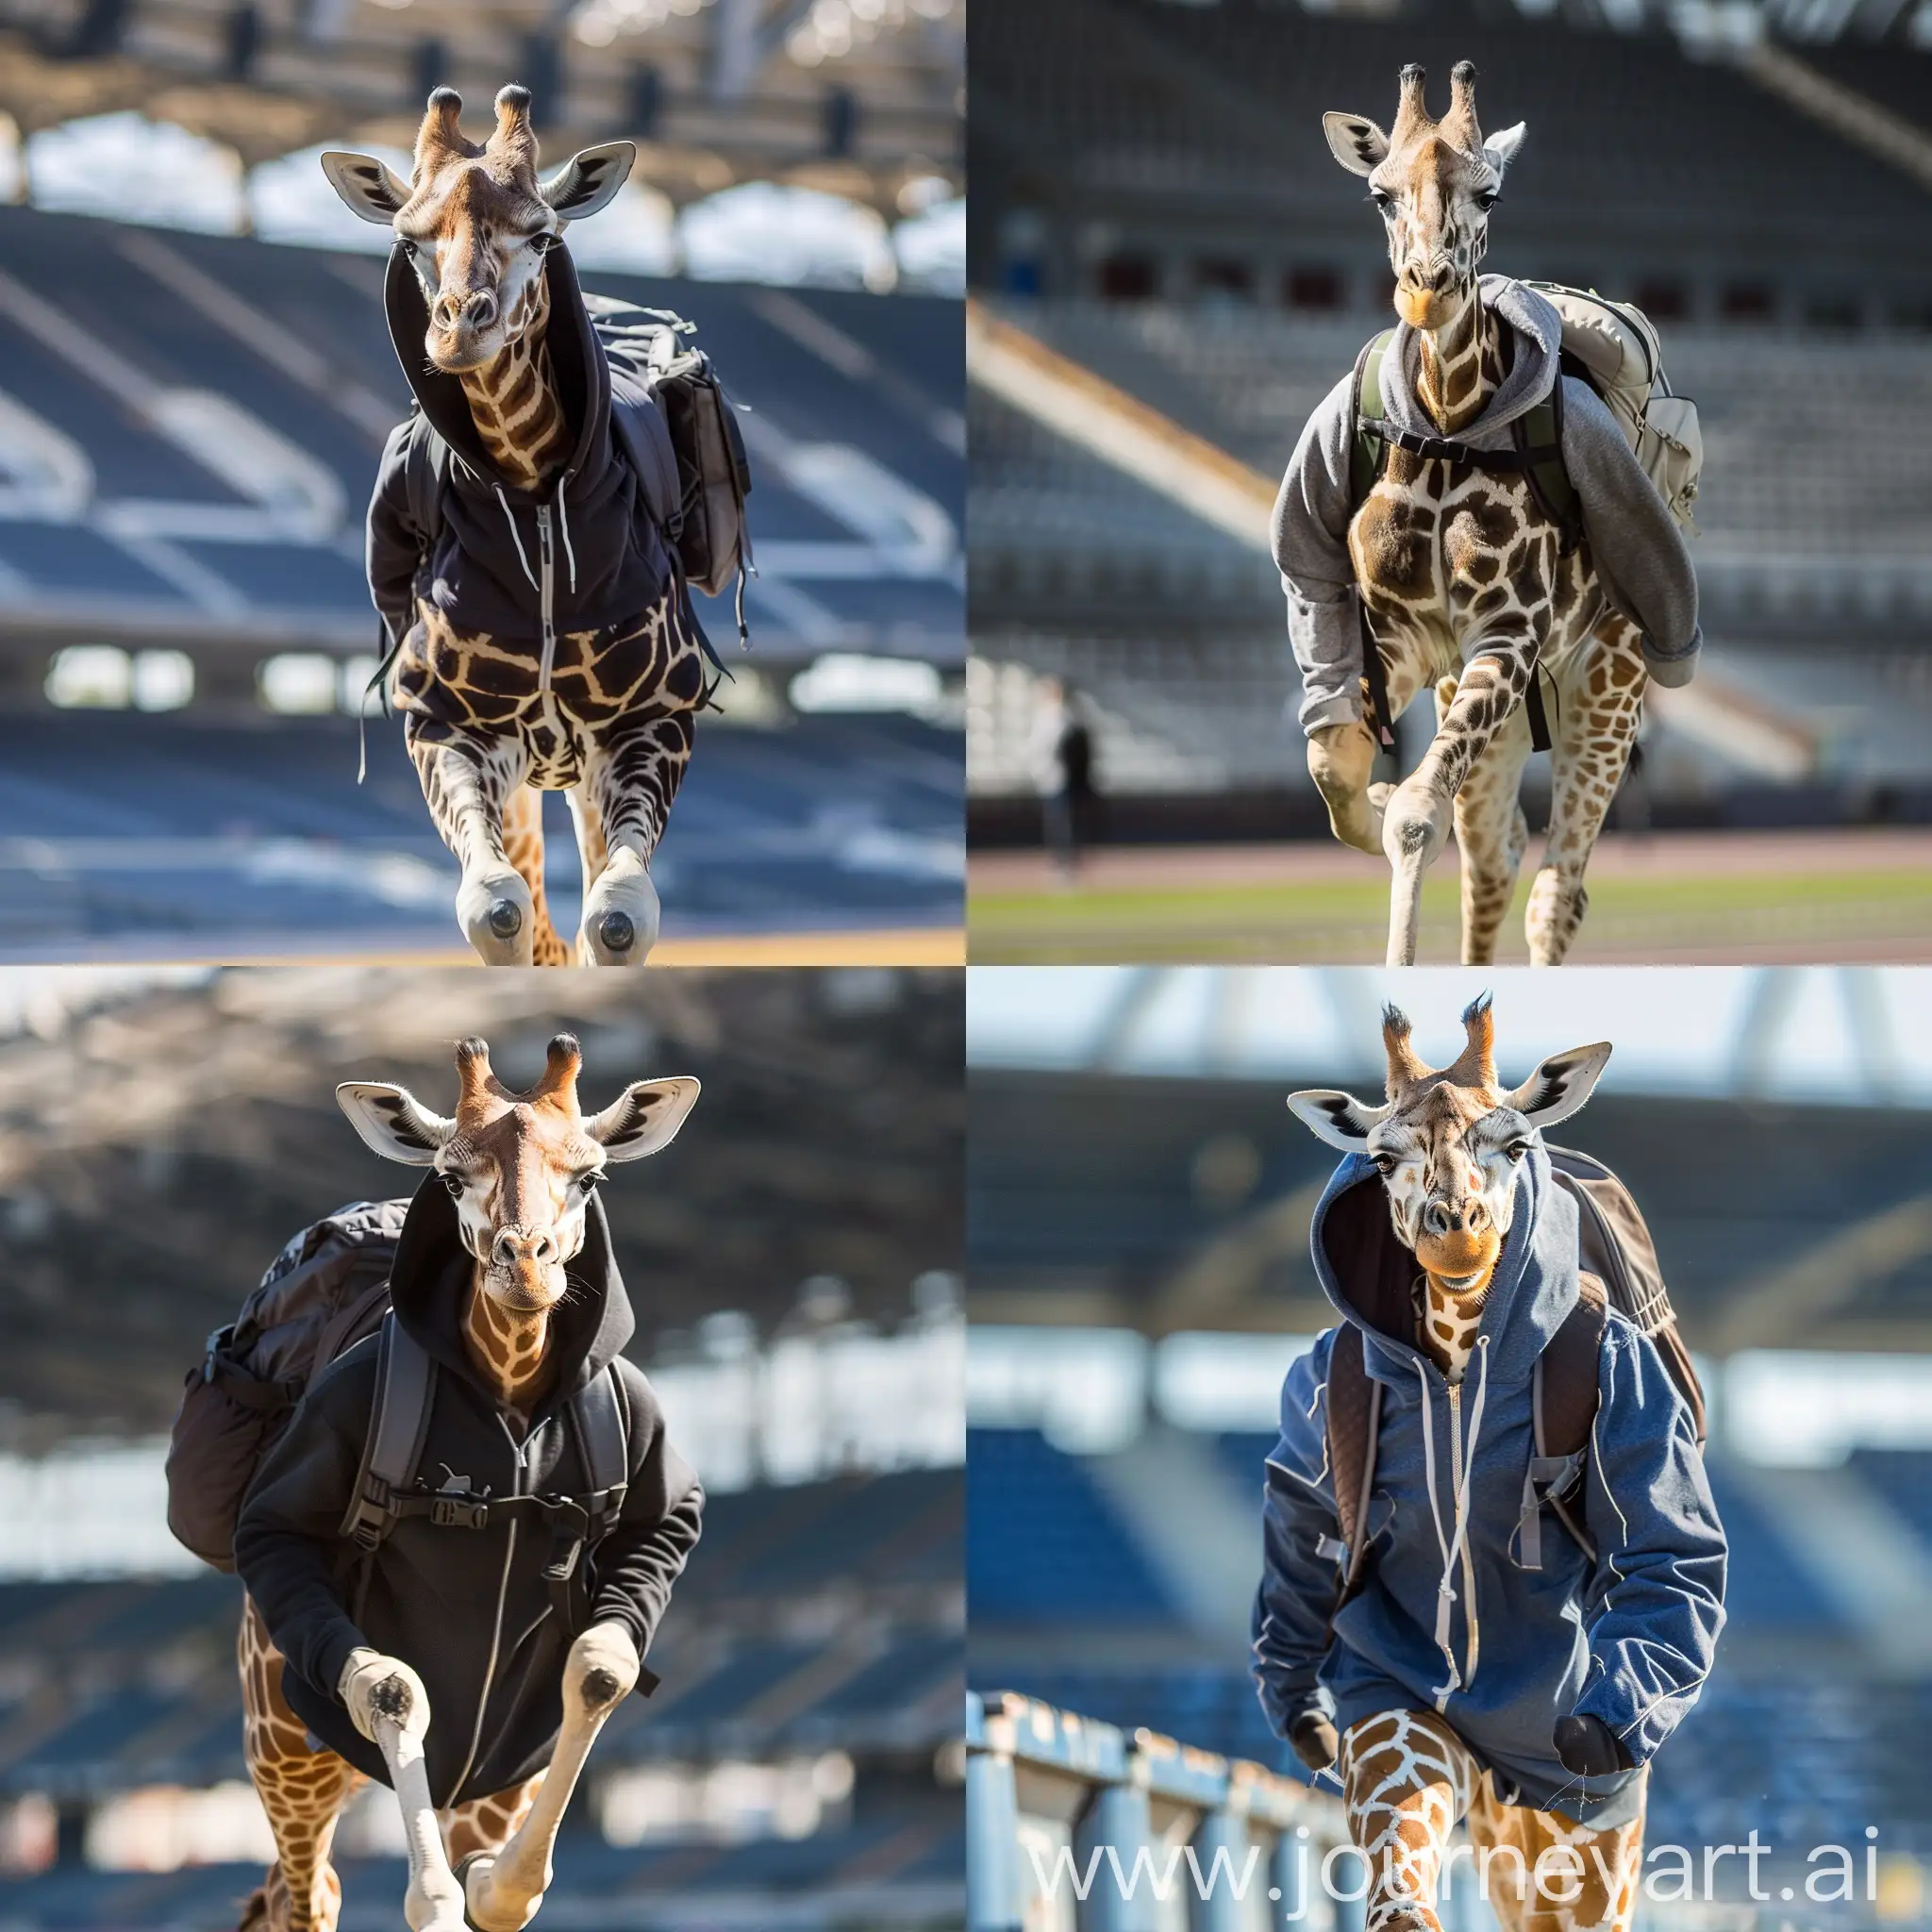 Athletic-Giraffe-Running-with-Hood-and-Backpack-on-Stadium-Field